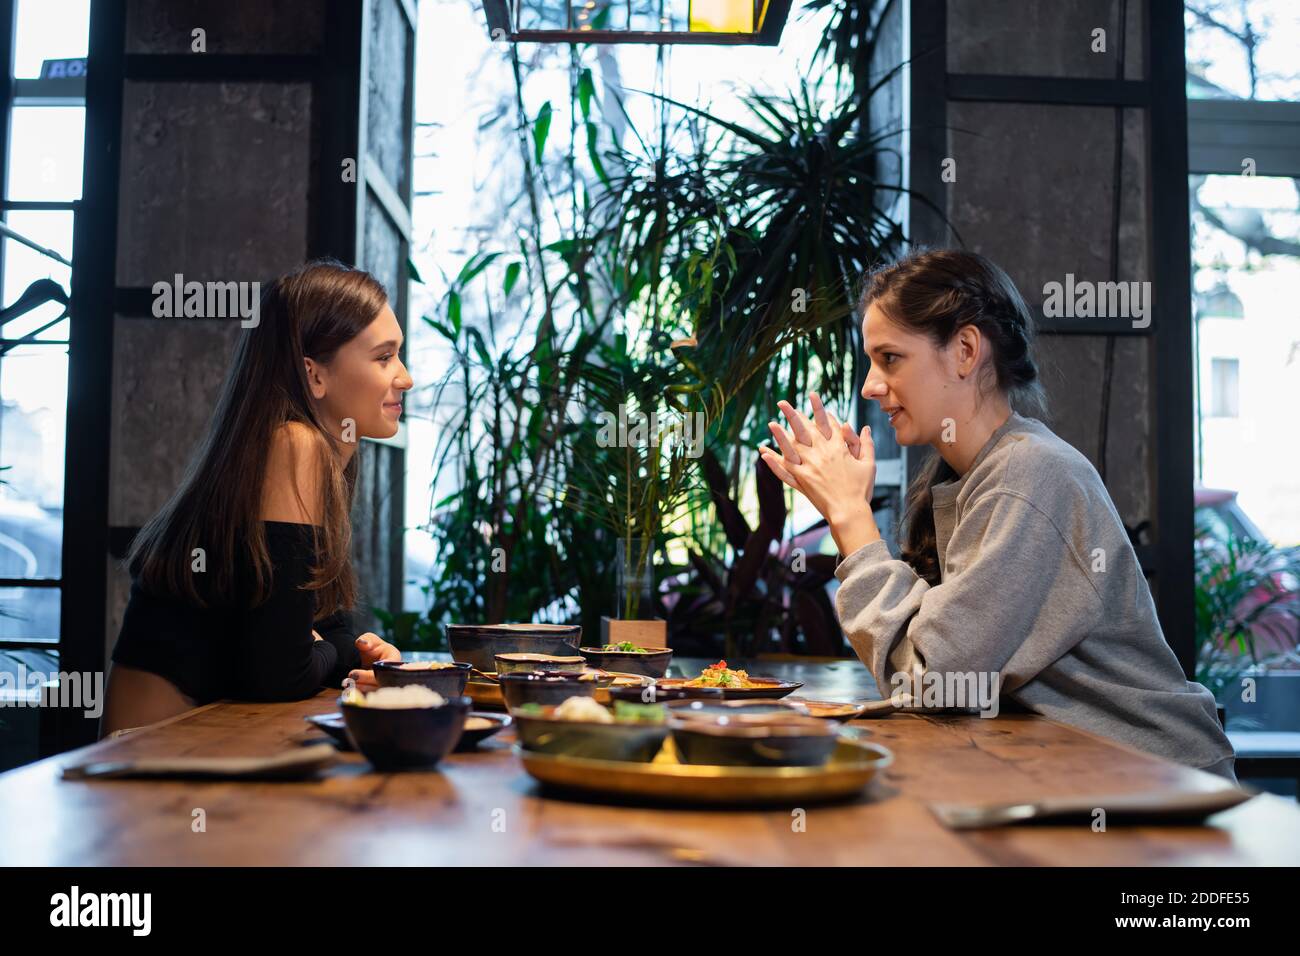 Two girlfriends chatting and having some snacks in a cafe. Stock Photo